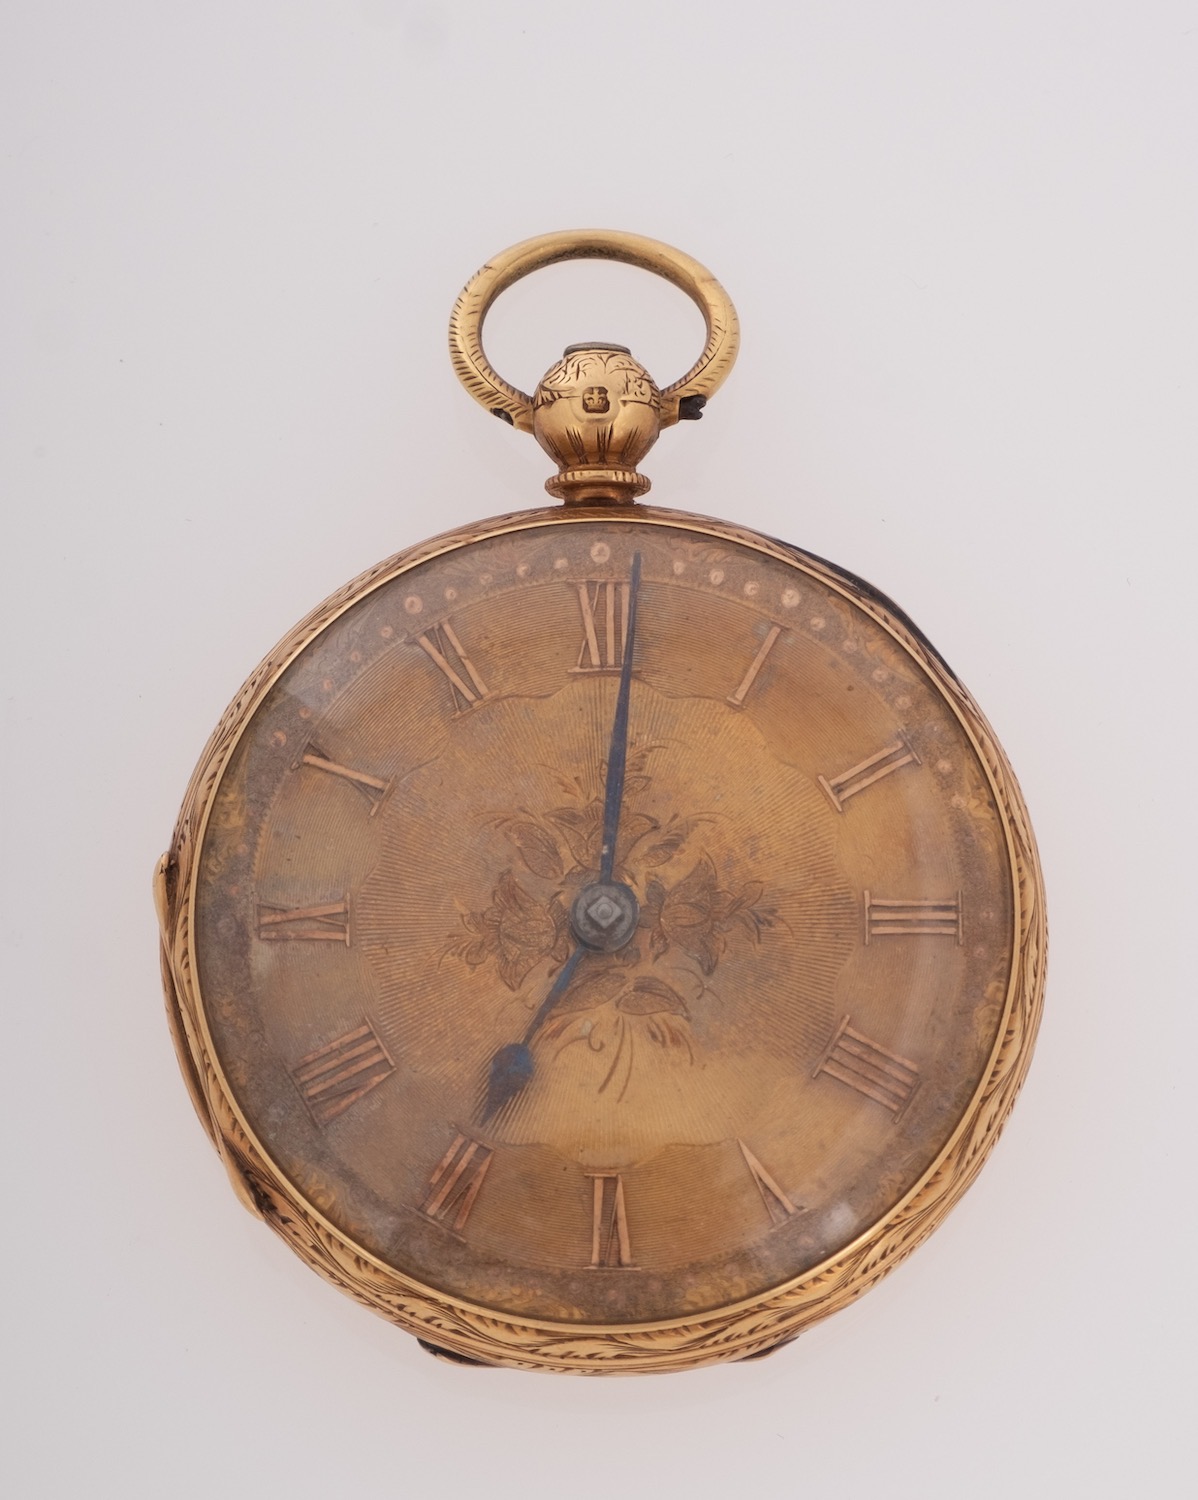 John Bell, York, an 18ct gold open-faced pocket watch the gold dial with engraved decoration,